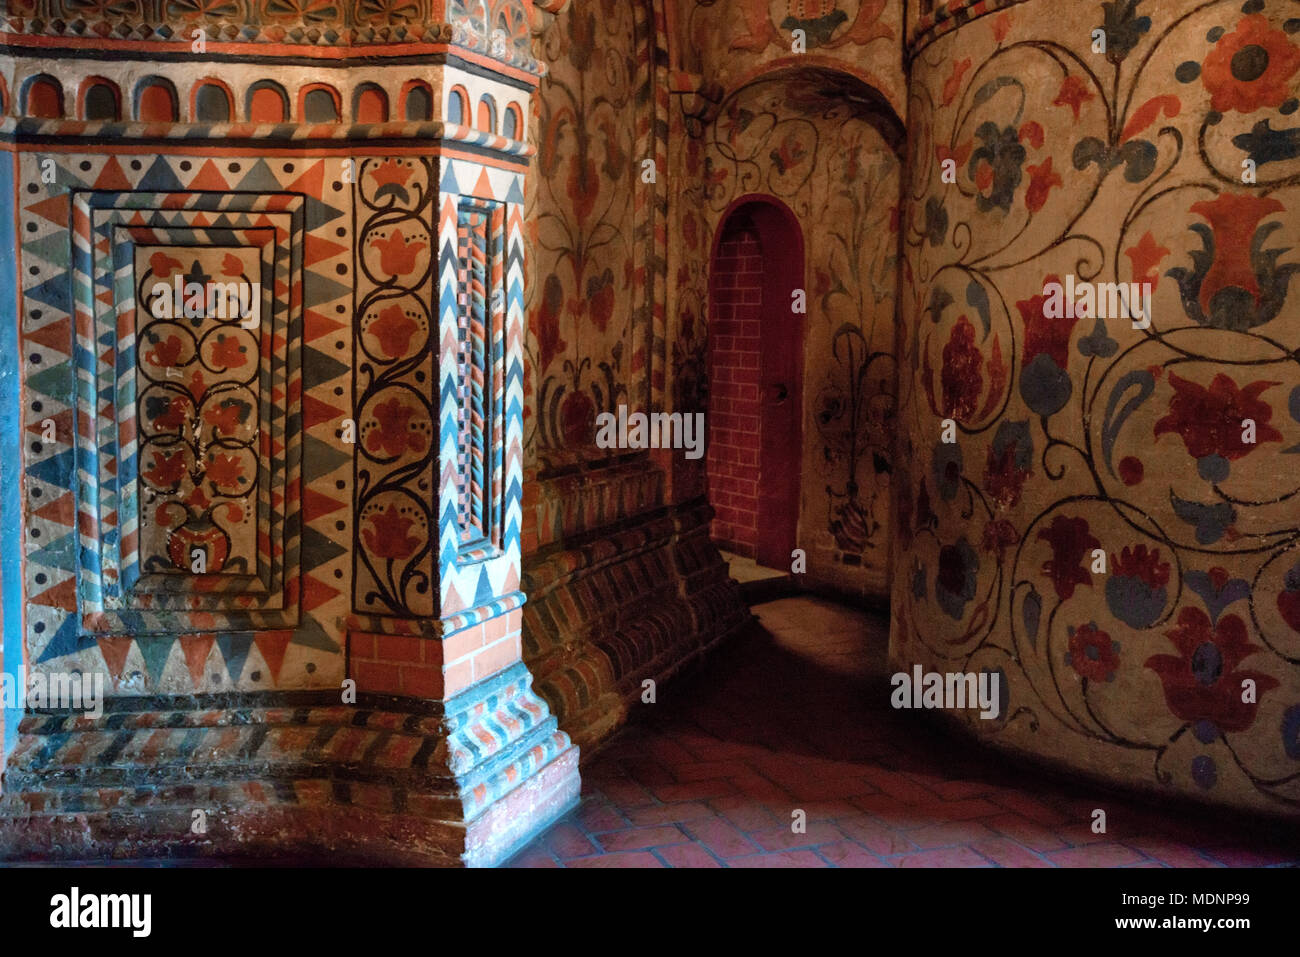 MOSCOW - NOVEMBER 2, 2014: Interior of St.Basil's Cathedral in Moscow Stock Photo